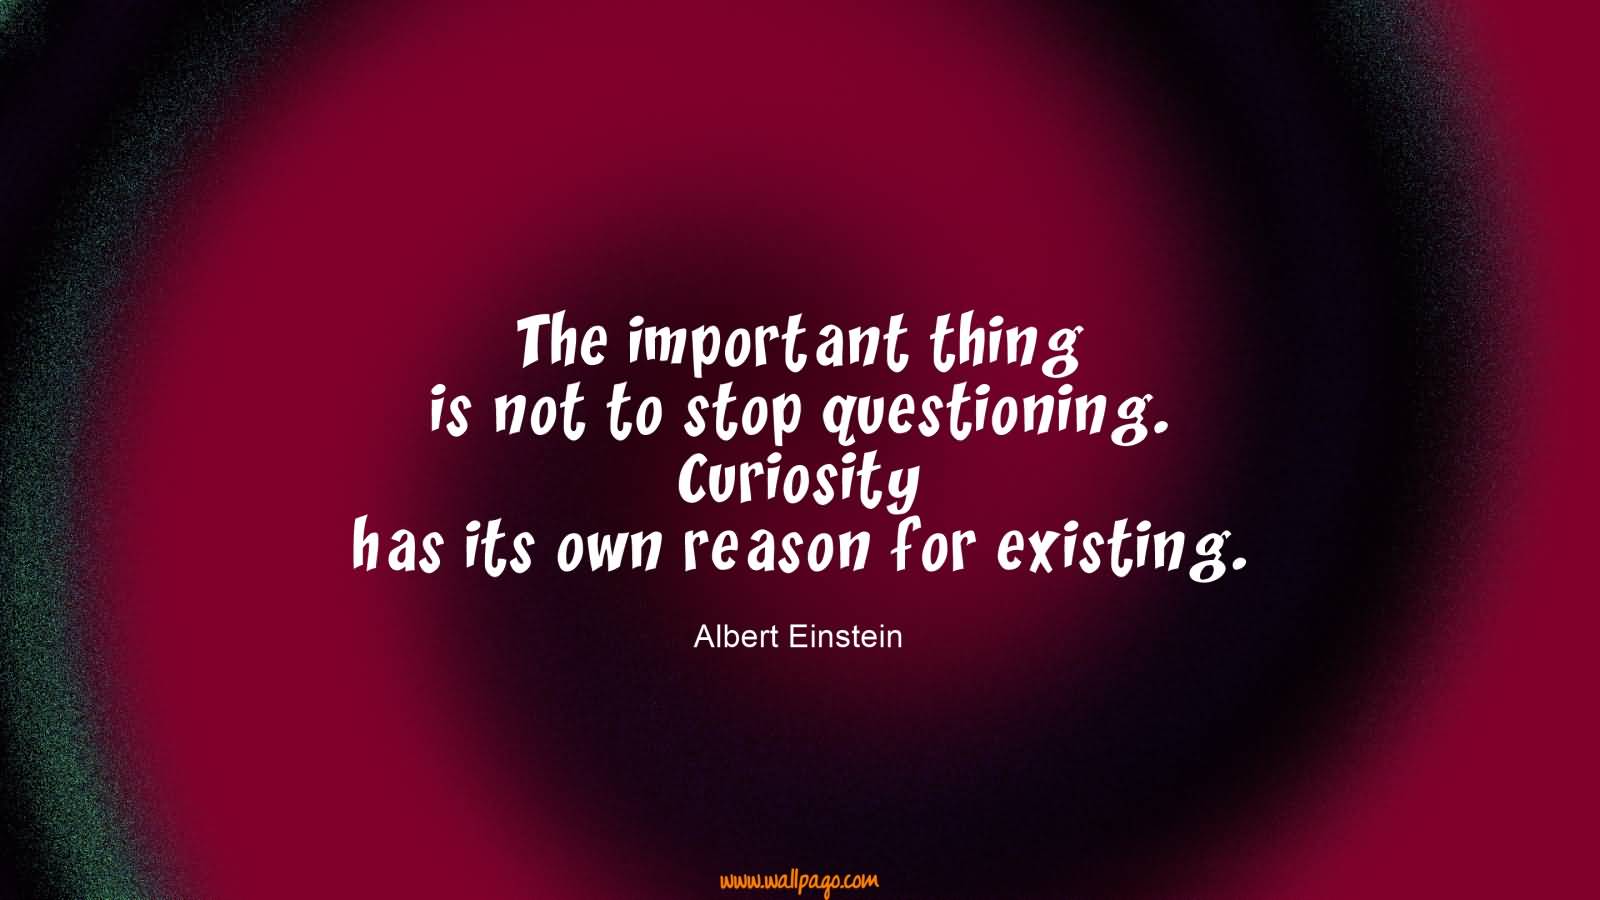 The important thing is not to stop questioning. Curiosity has its own reason for existing.